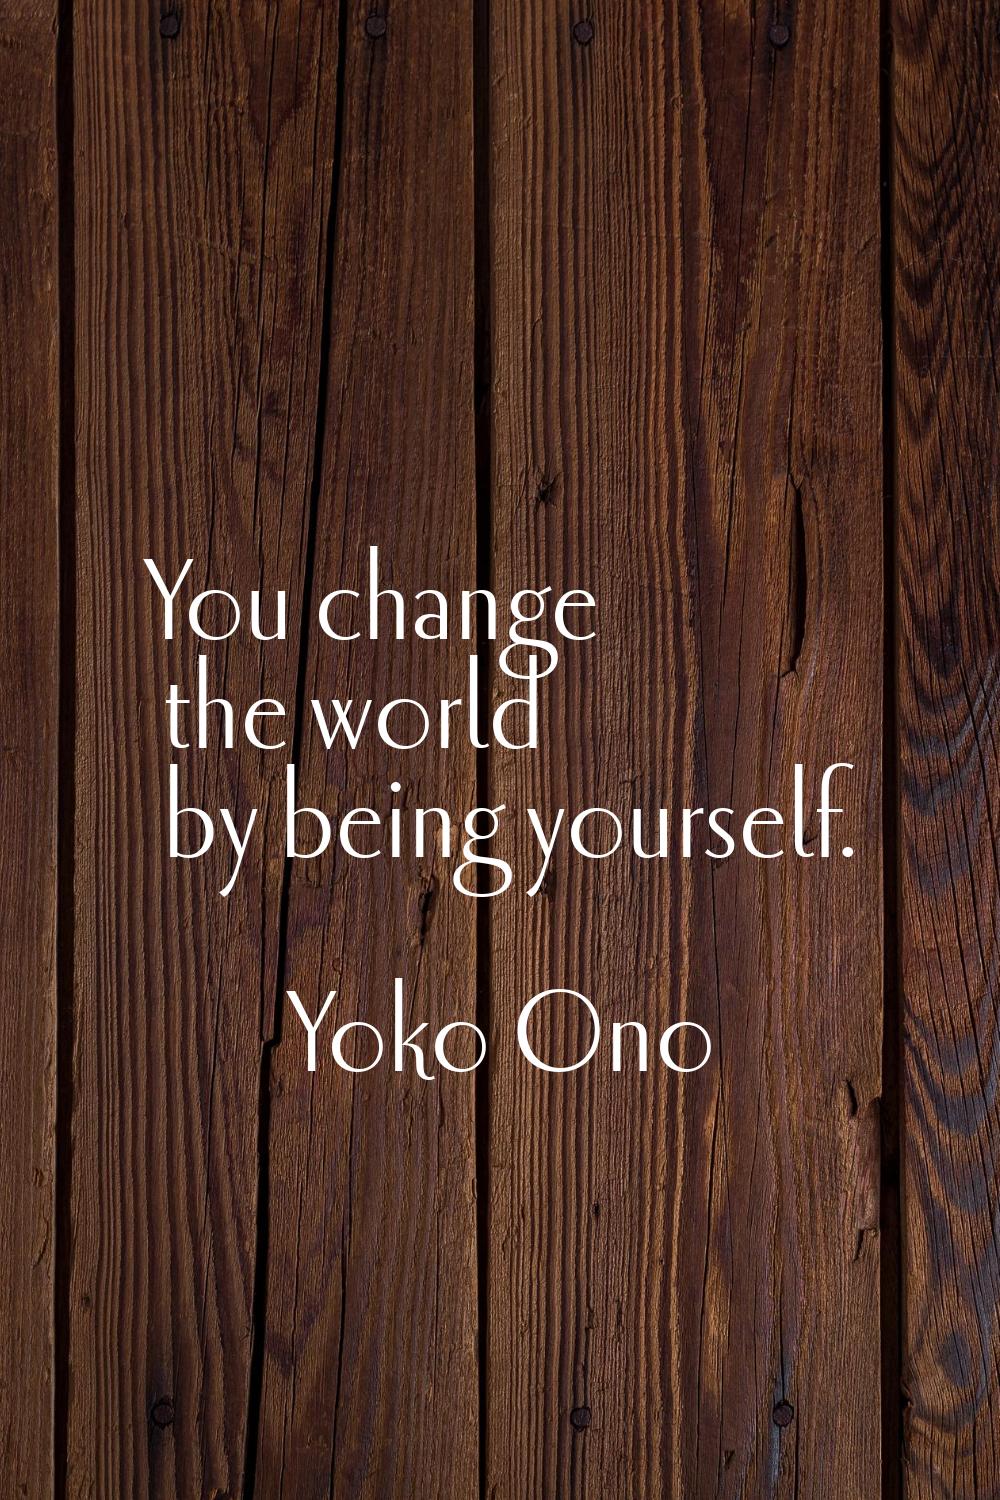 You change the world by being yourself.